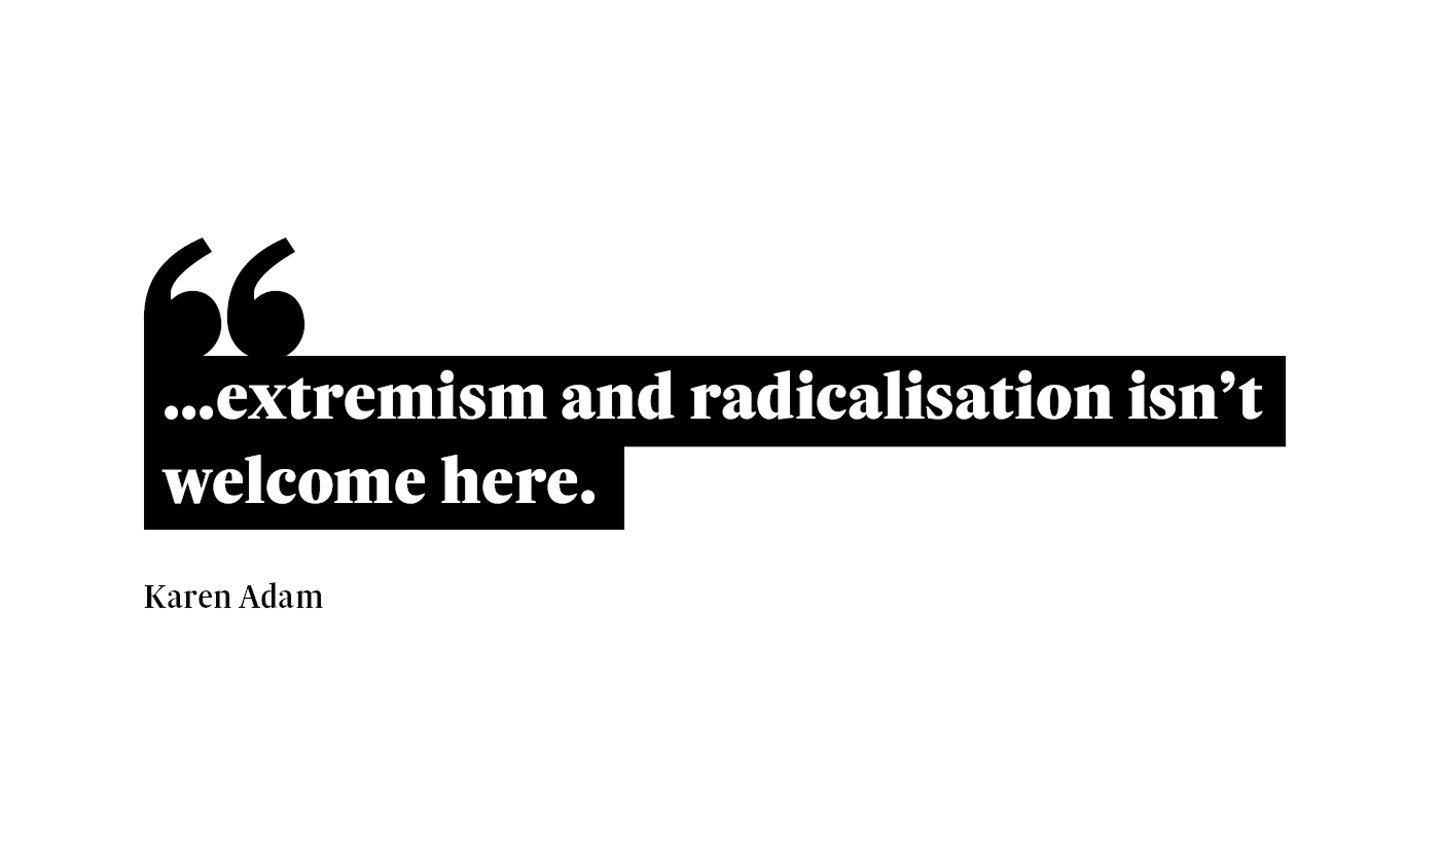 A graphic that reads: "...extremism and radicalisation isn't welcome here." A quote from Karen Adam